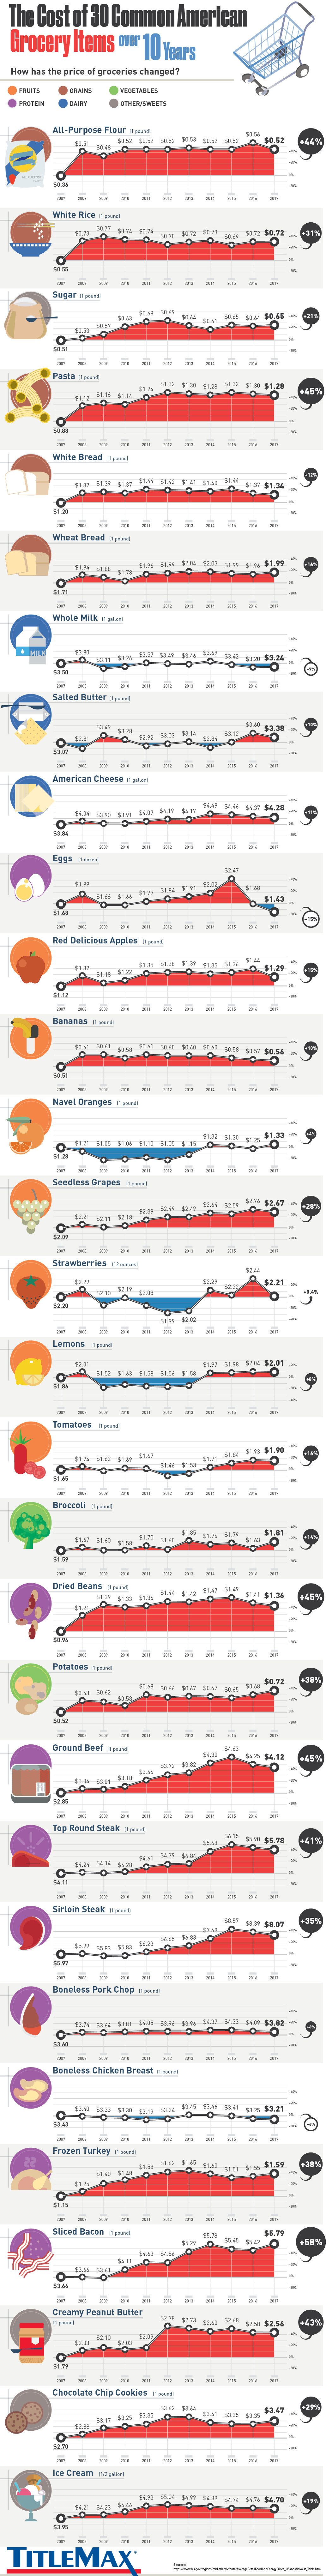 A Decade of Grocery Prices for 30 Common Items